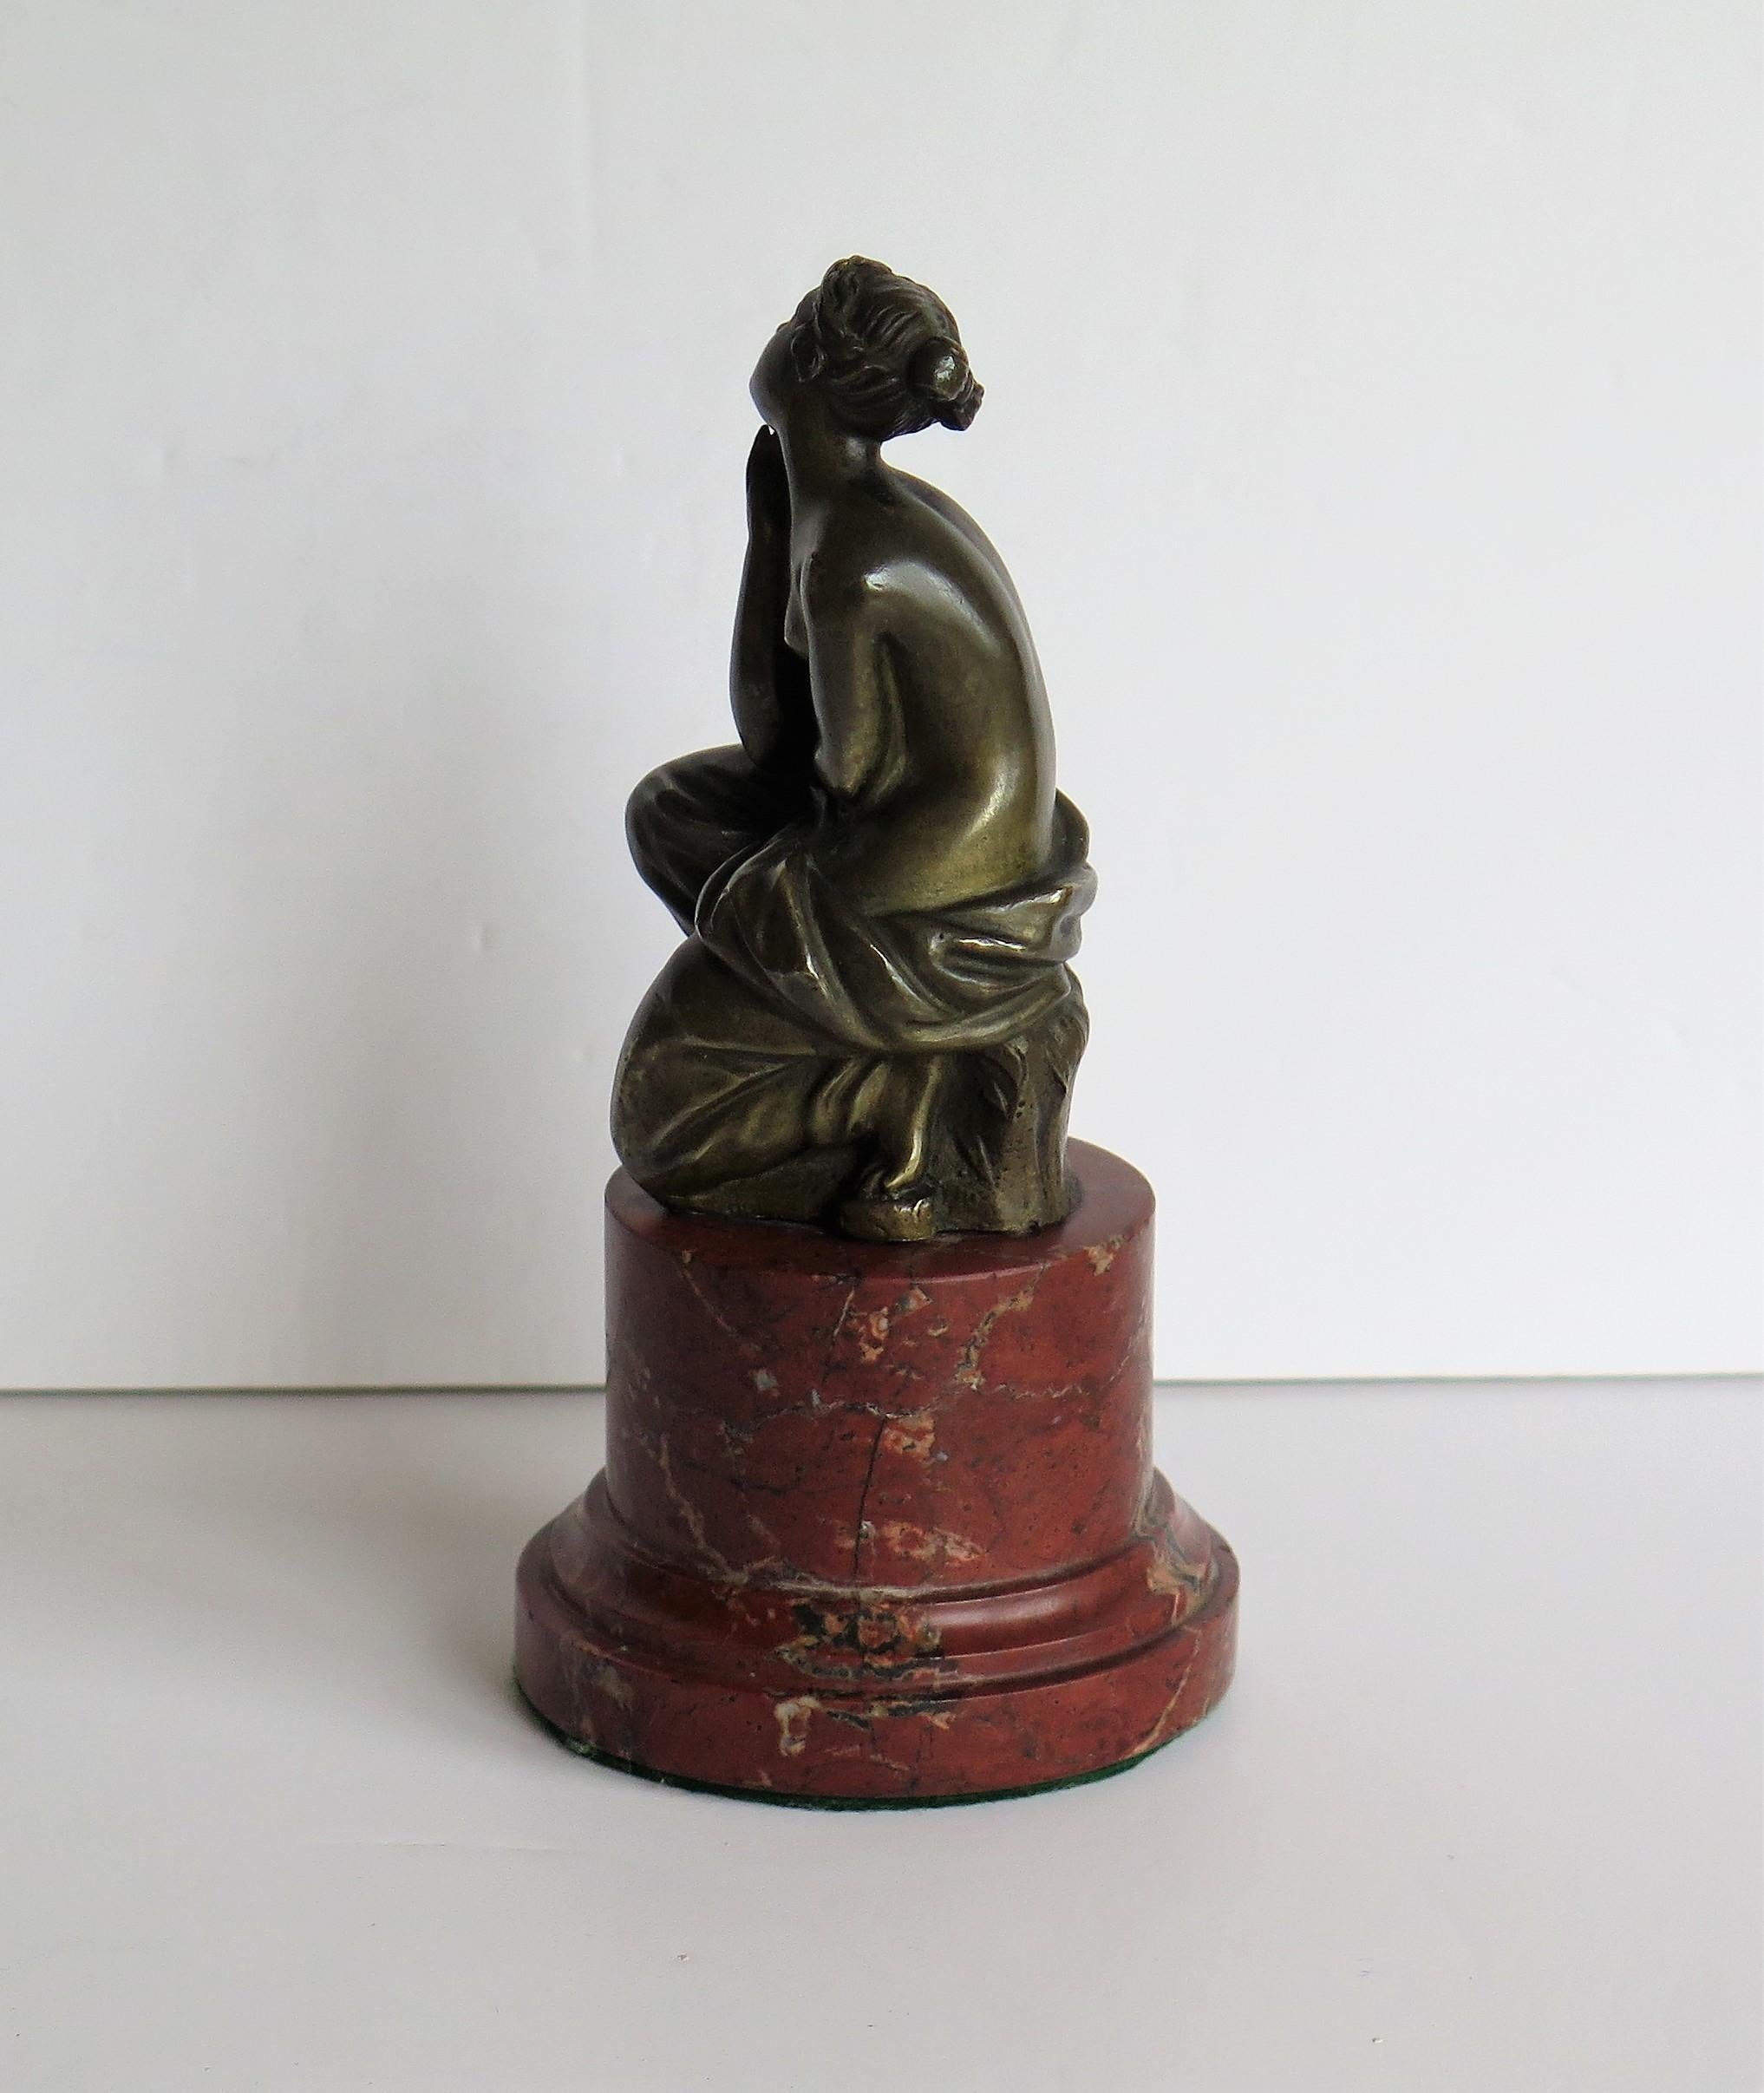 This is a solid bronze figurine sculpture of a seated lady on a good red marble base, in the art-nouveau style and dating to the 19th century, probably by a French or Austrian maker.

The bronze figure is beautifully sculpted in very good clear